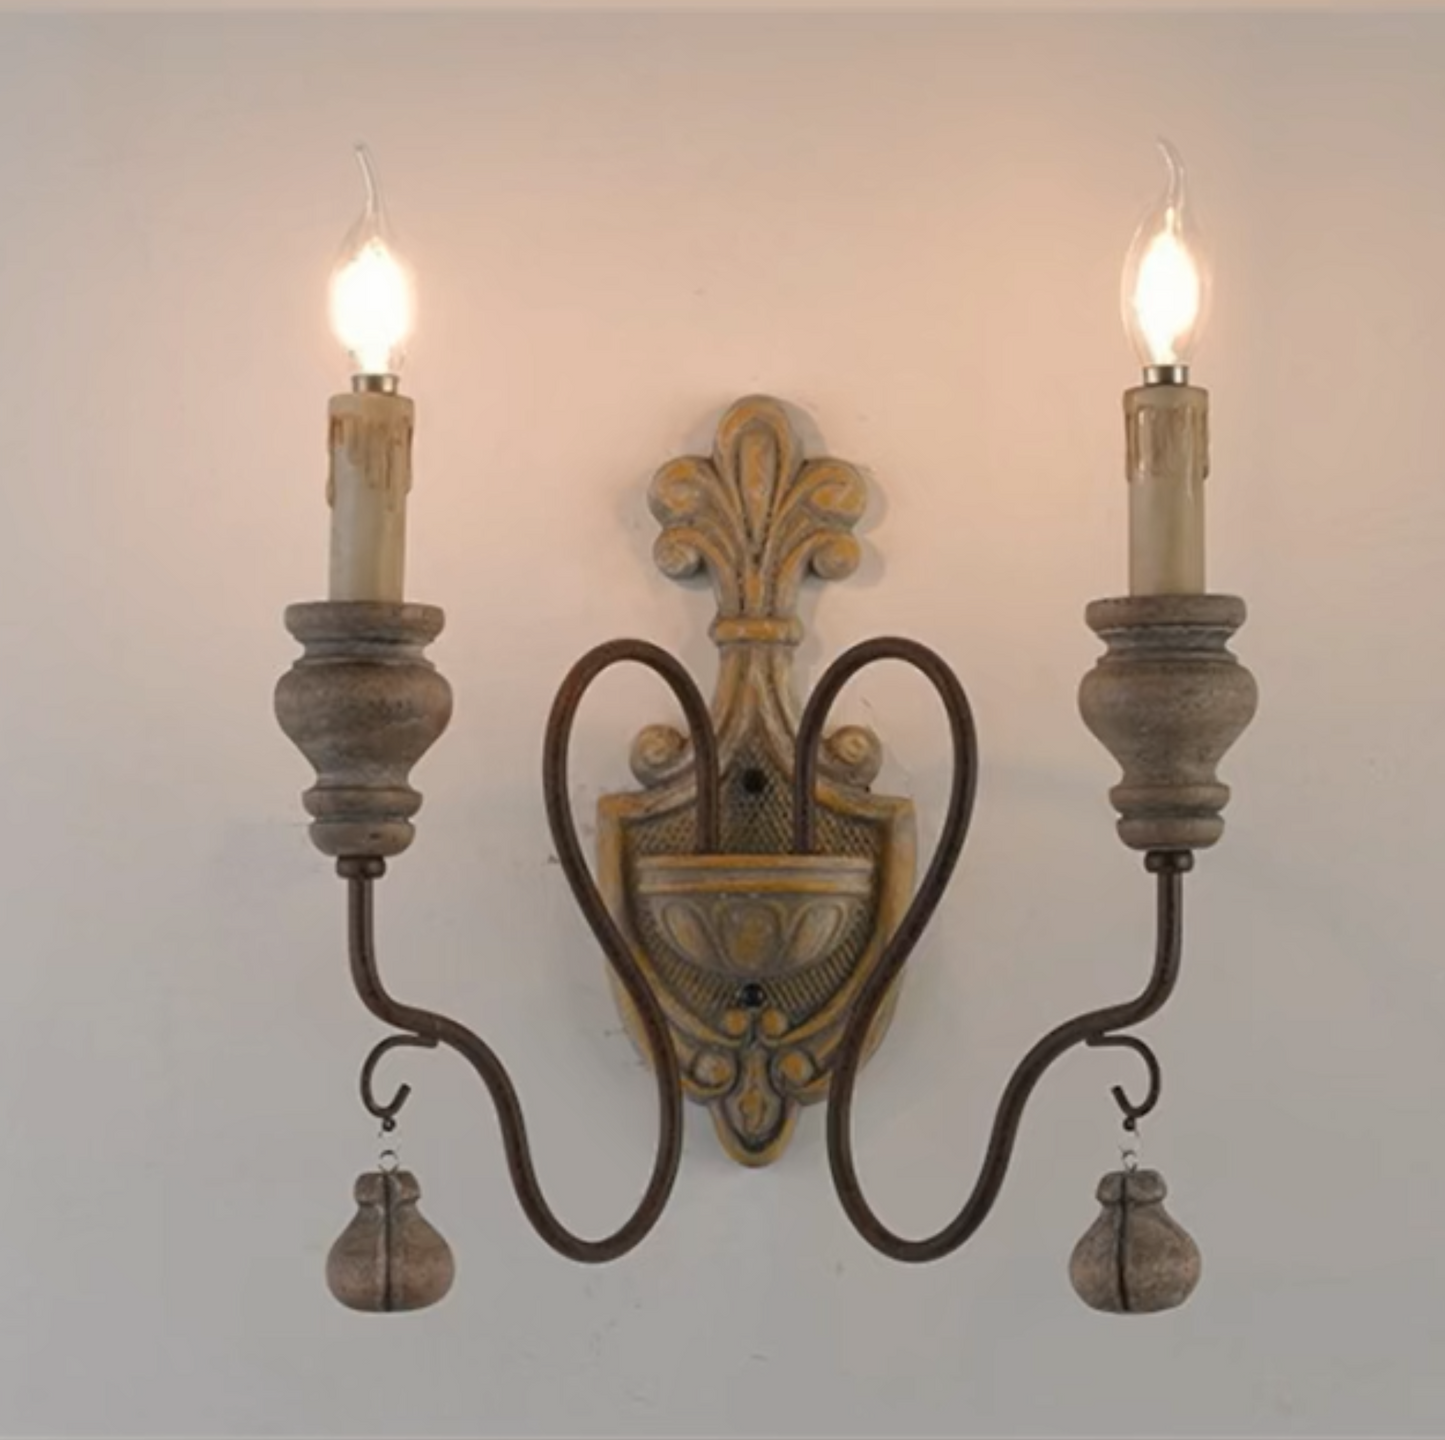 Load image into Gallery viewer, Unique Old Wood With Hardware Decorative Wall Light by Gloss (9122/2)
